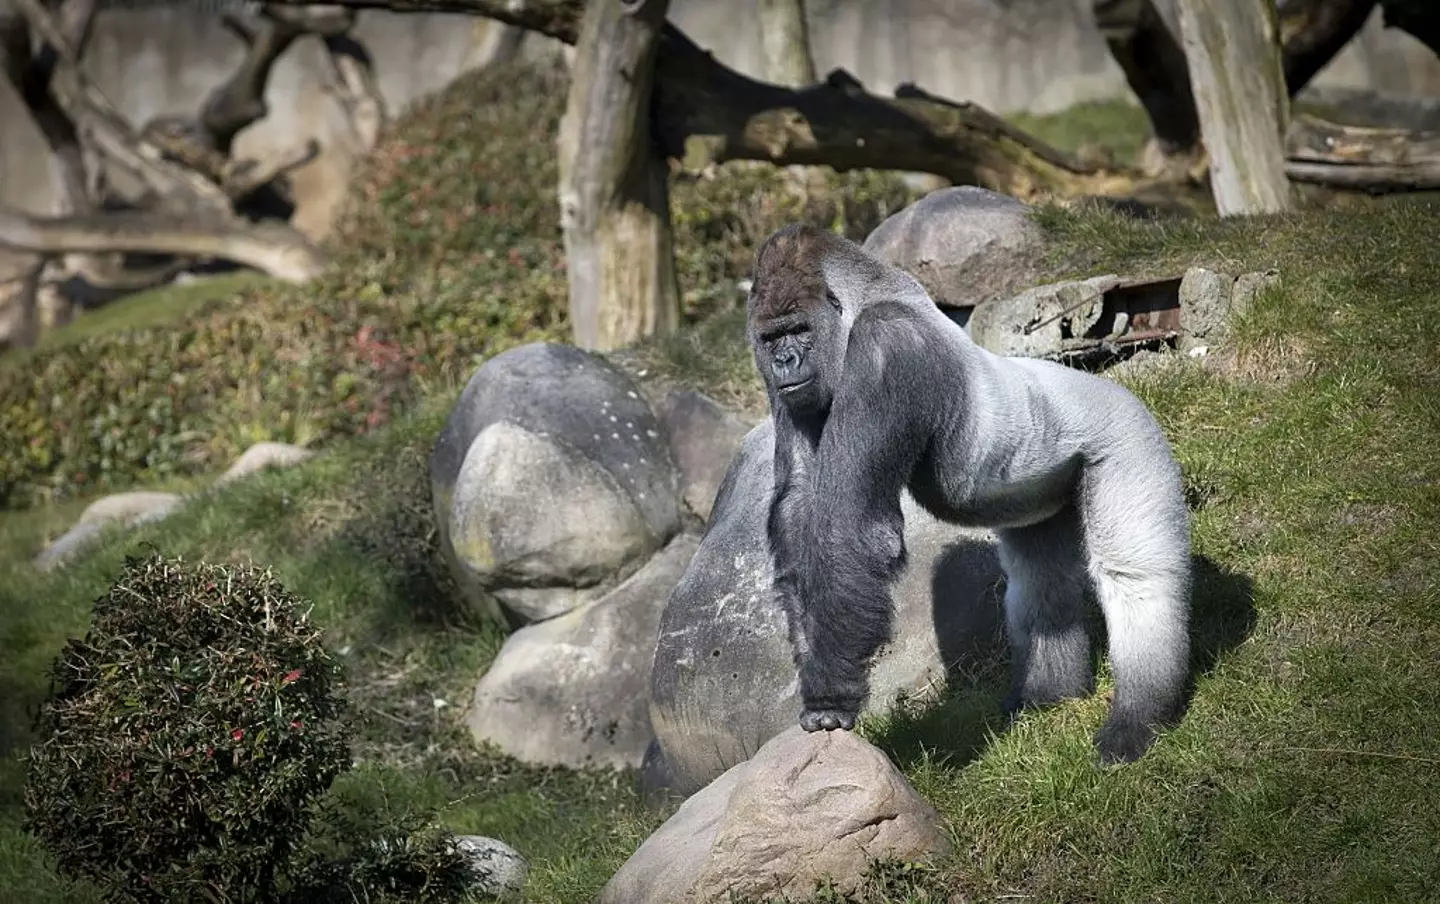 Bokito resided at the Diergaarde Blijdorp zoo in Rotterdam. (JERRY LAMPEN / Stringer / Getty Images)